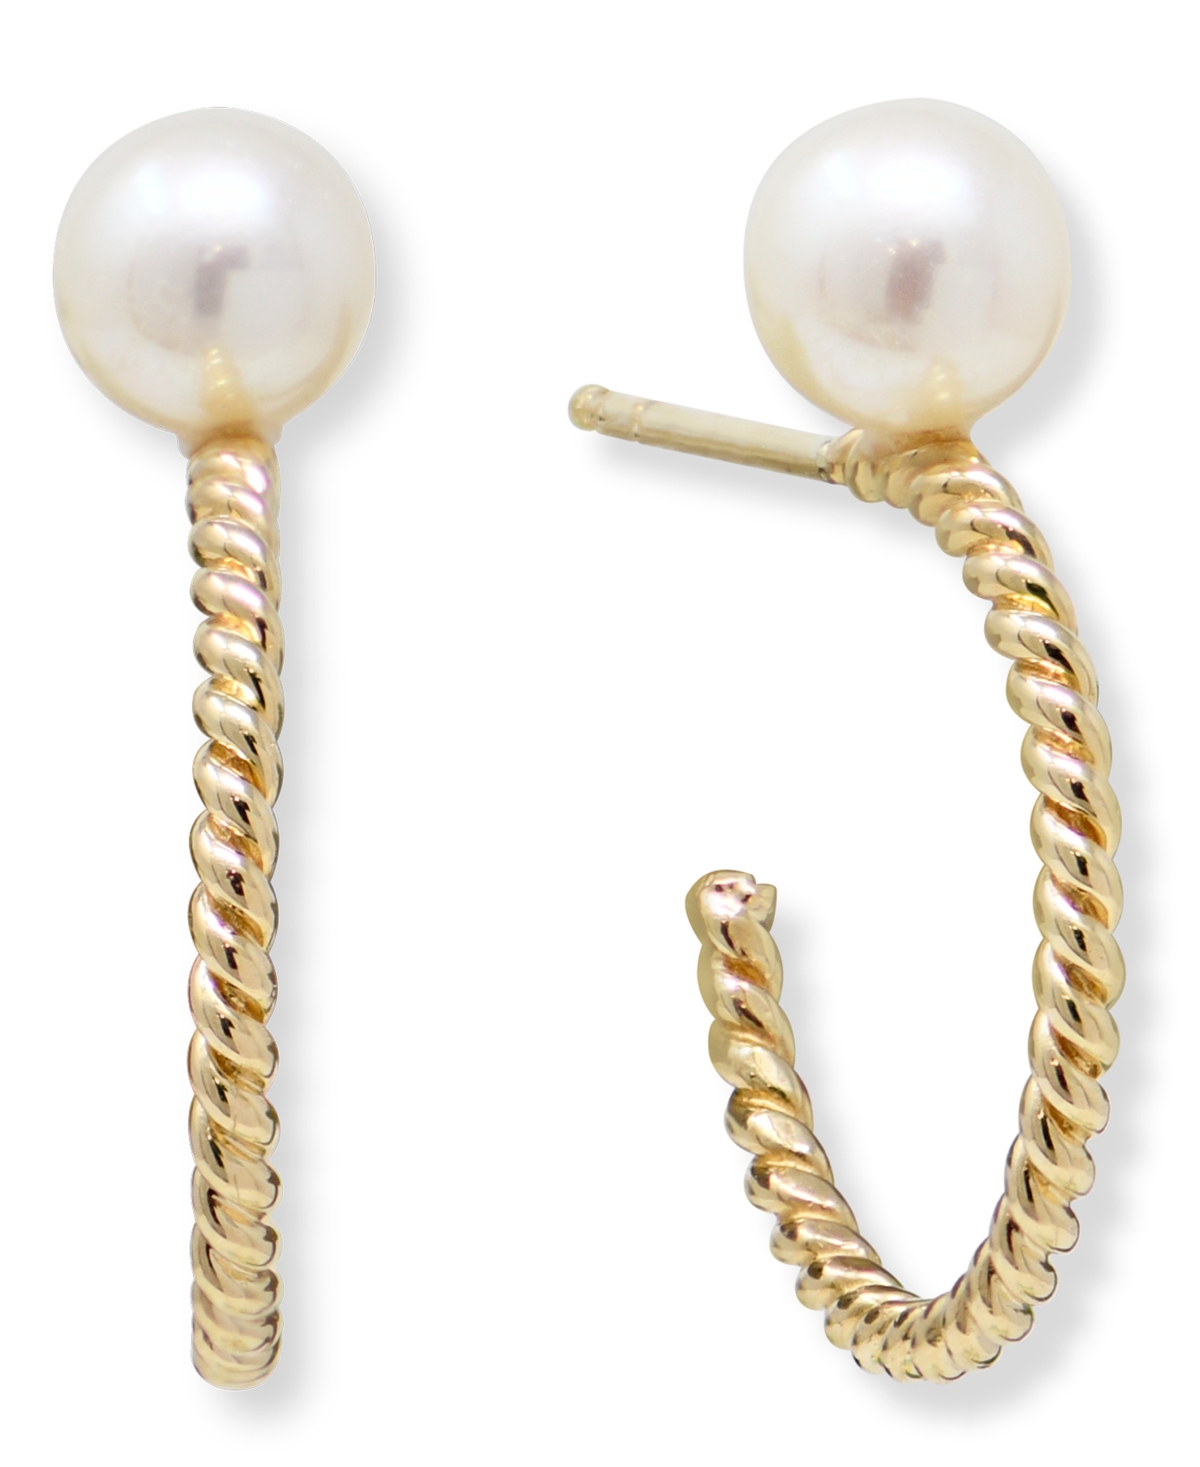 Freshwater Pearl (6mm) Twisted Hoop Earring in 14k Yellow Gold - Gold